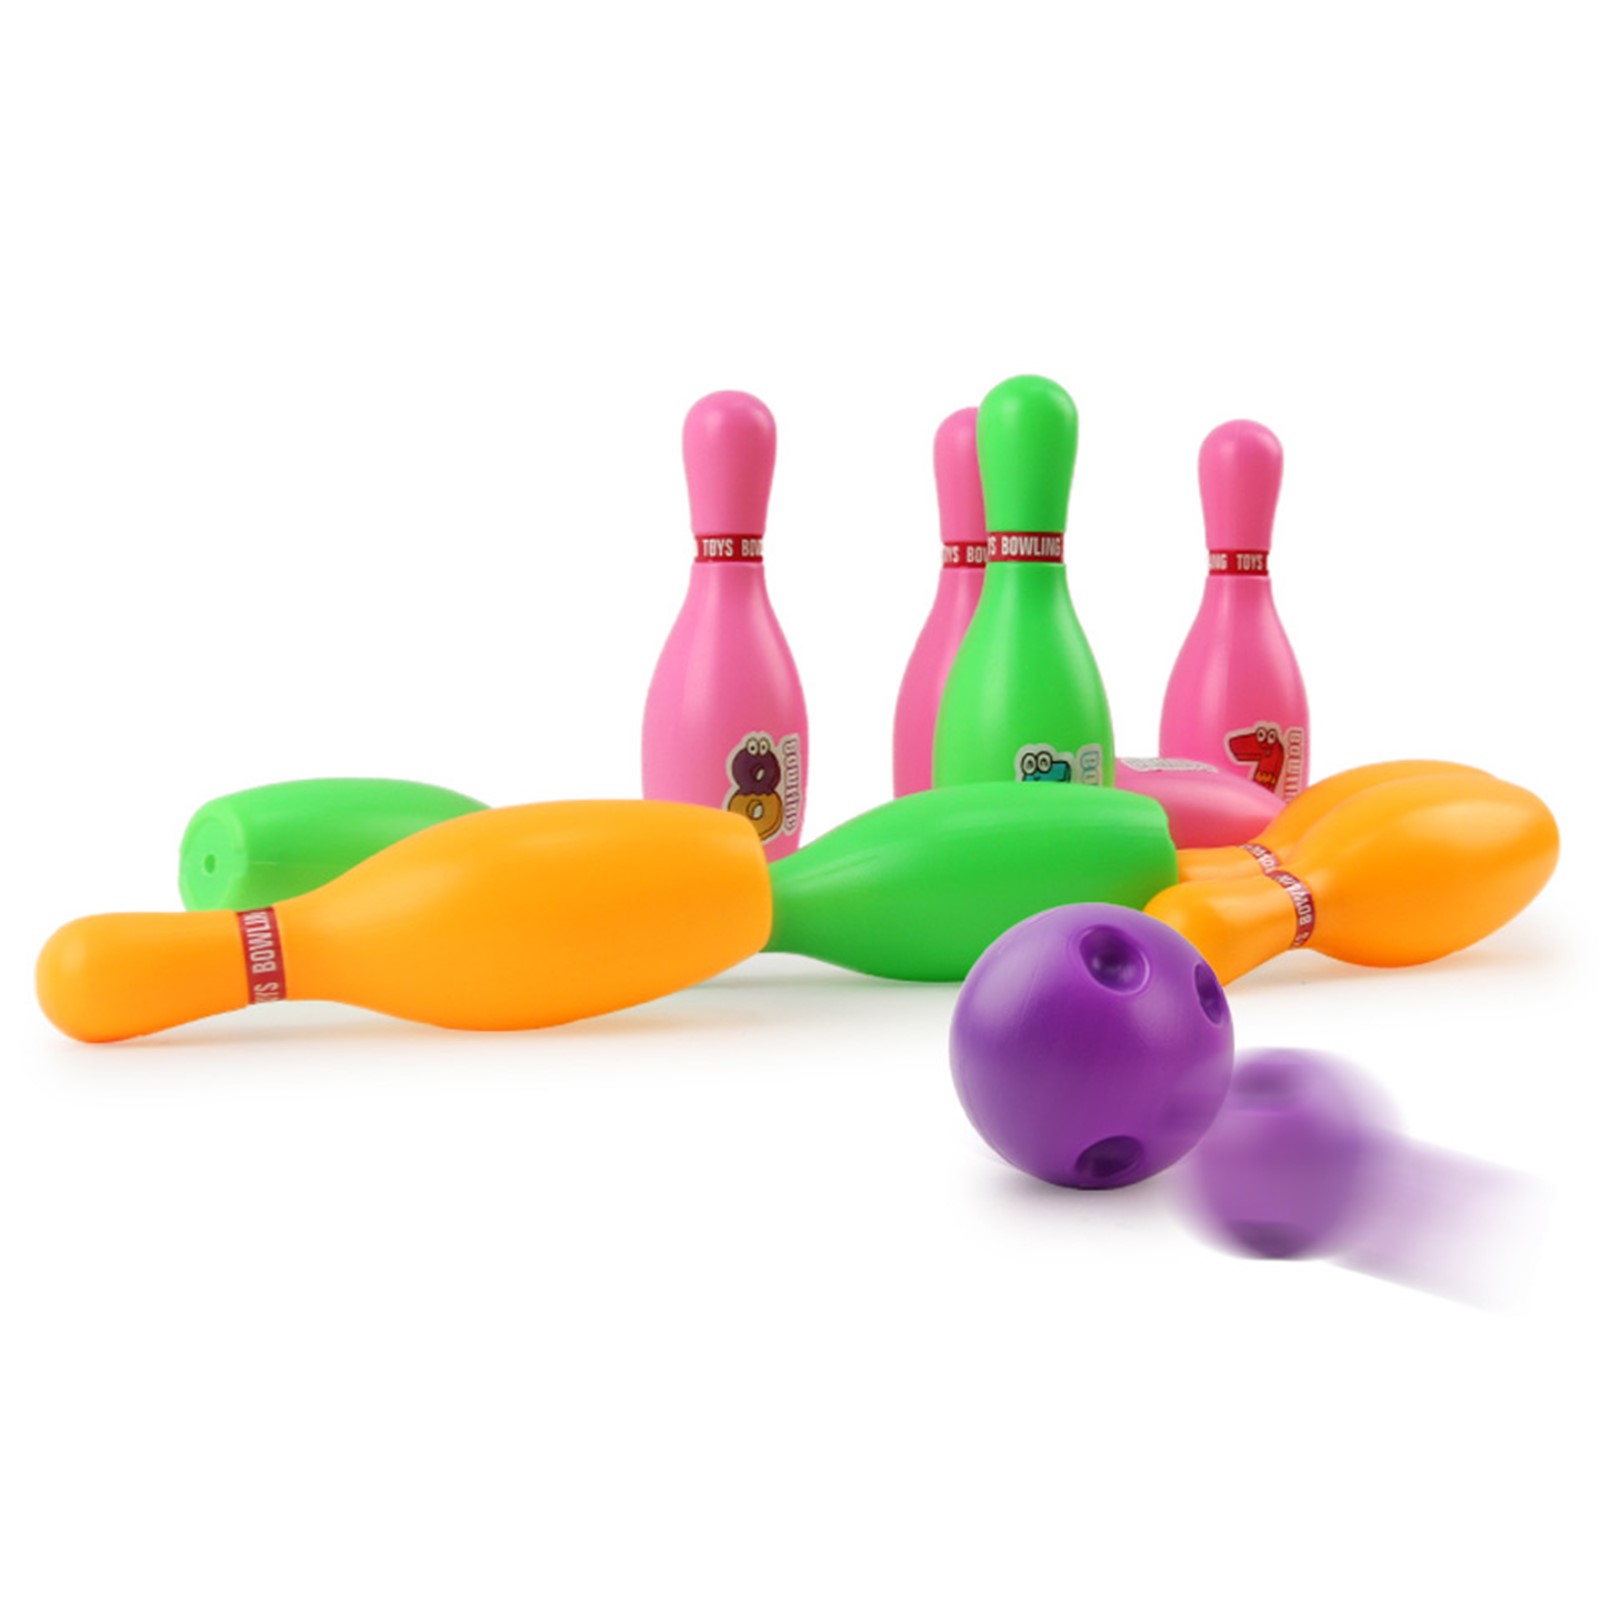 Toy Bowling Play Set Deluxe for Children Colorful 12 Piece 10 Pins 2 Balls Carrying Case Childrens Educational Early Development Sport Safe Game for Ages 2 3 4 5 Year Old Toddlers Unisex boy or girl TN-50